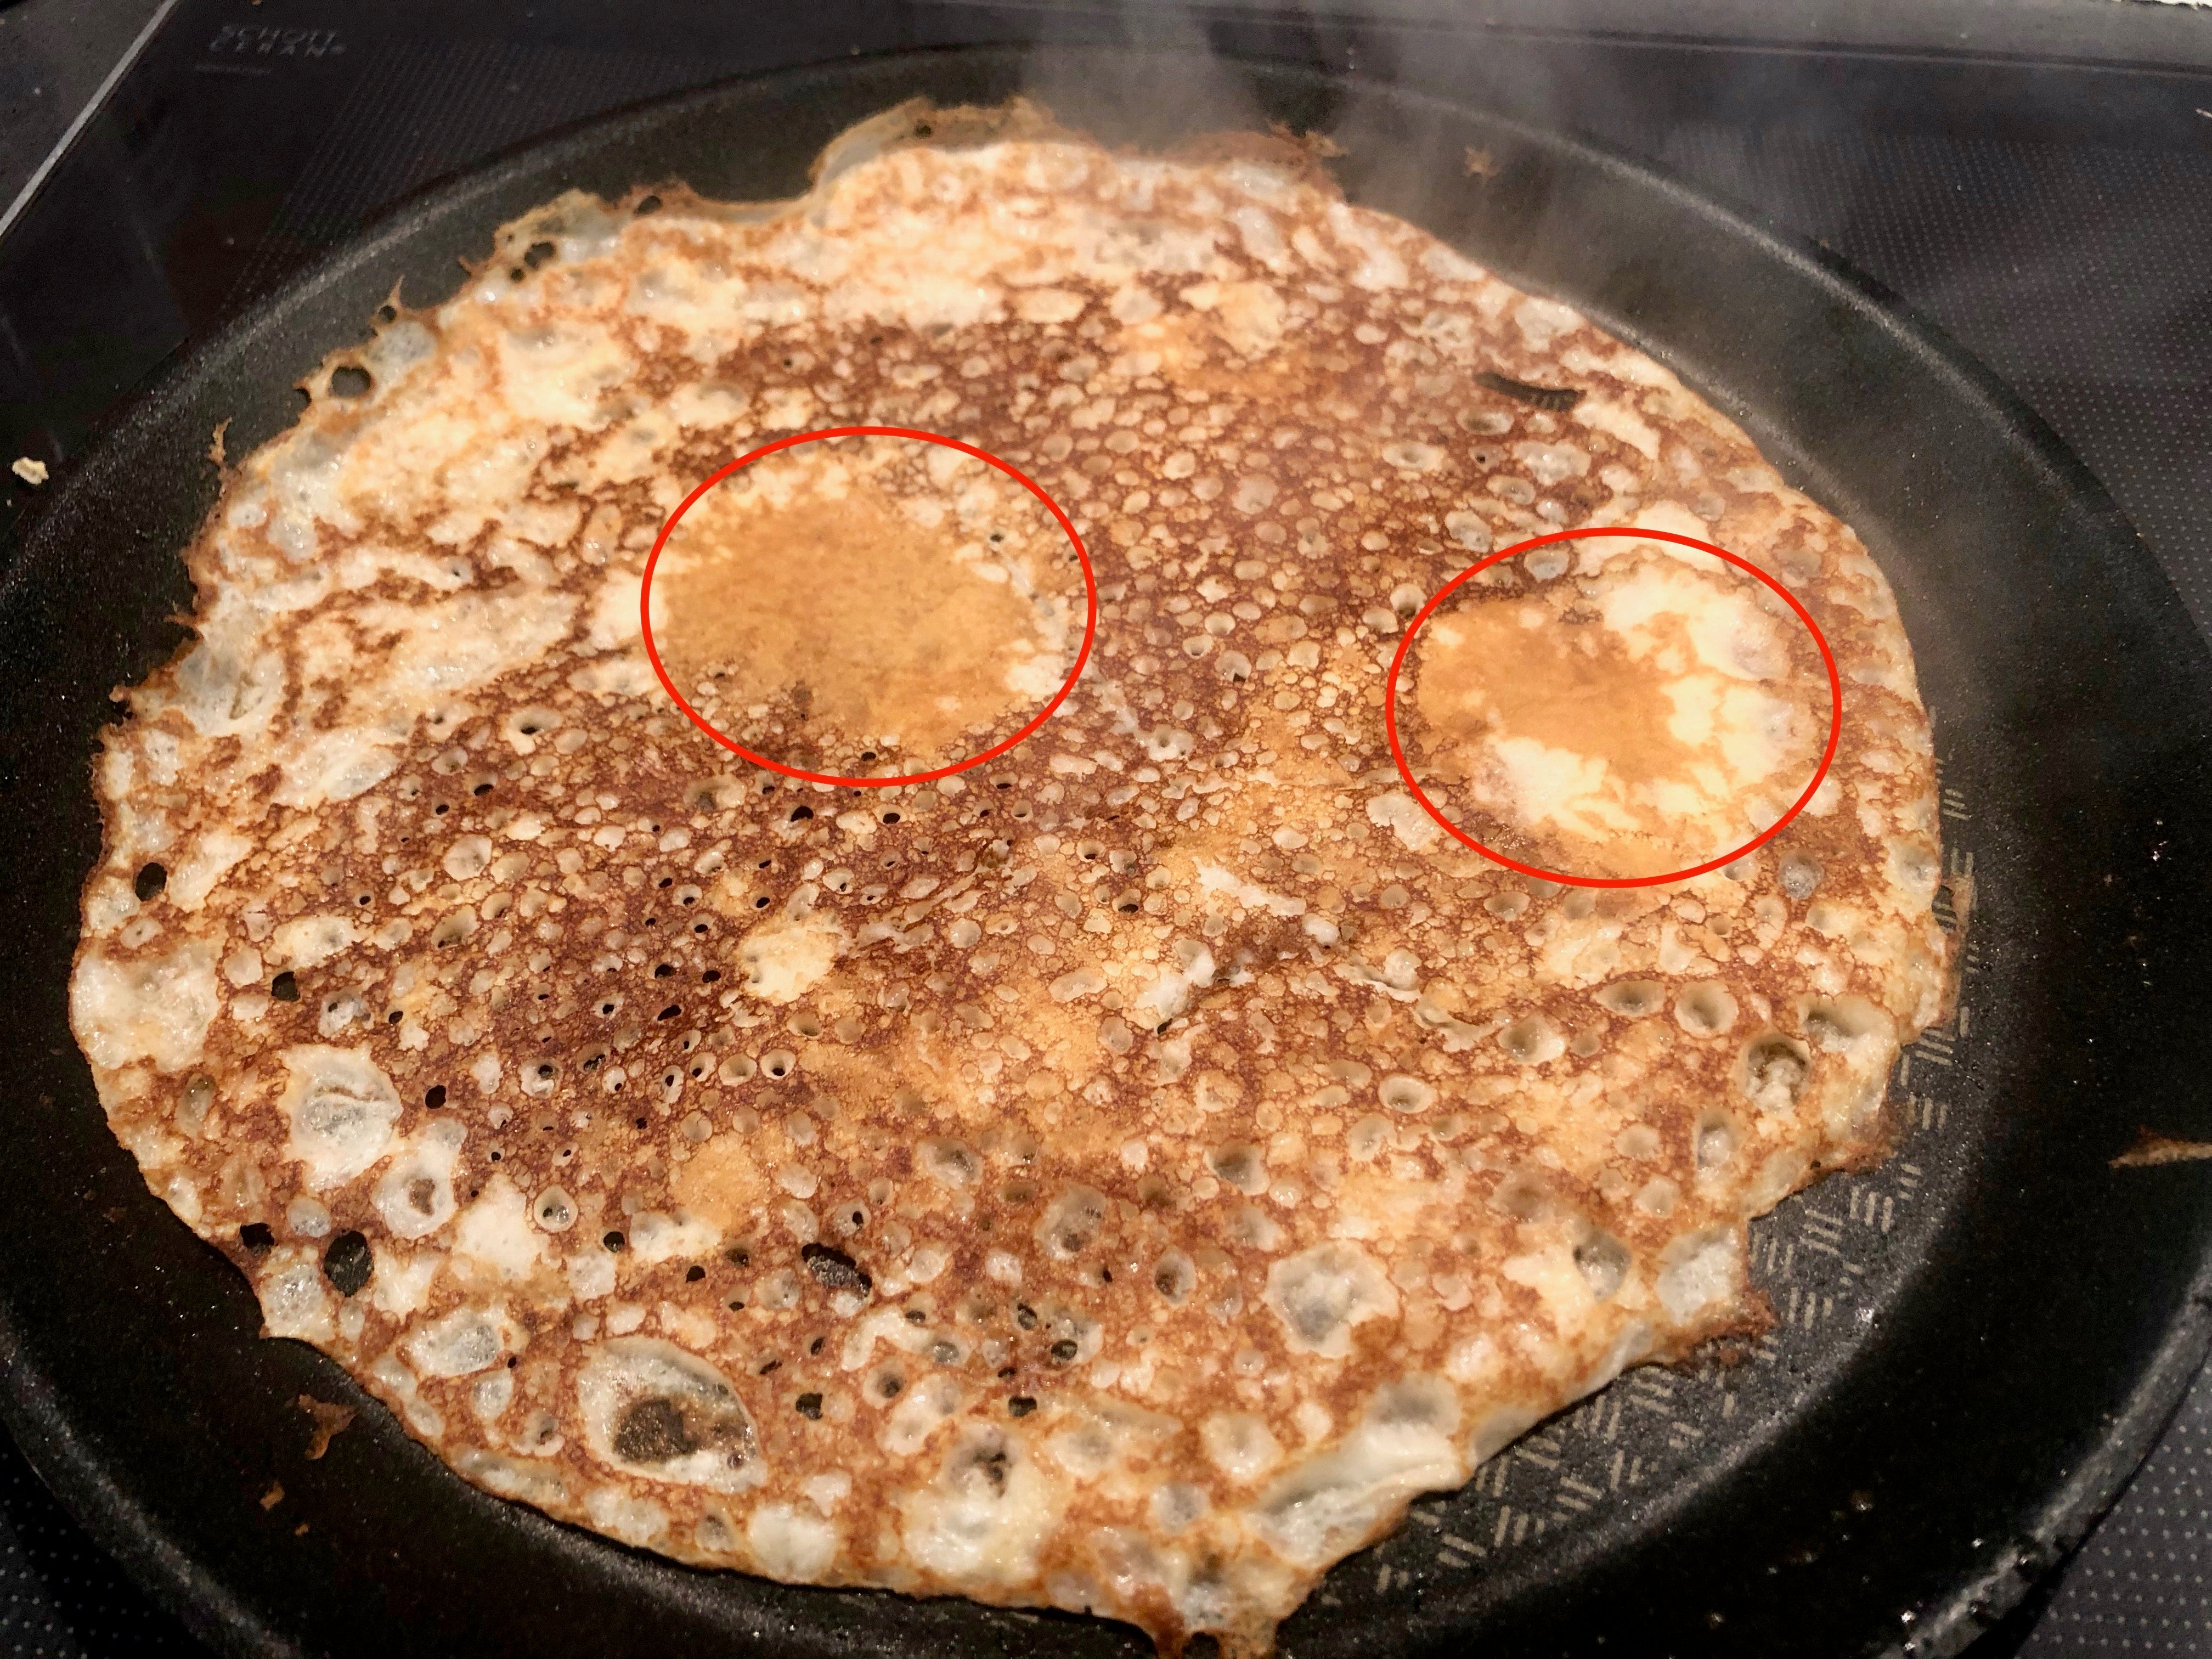 Right amount of butter in frying pan for pancakes